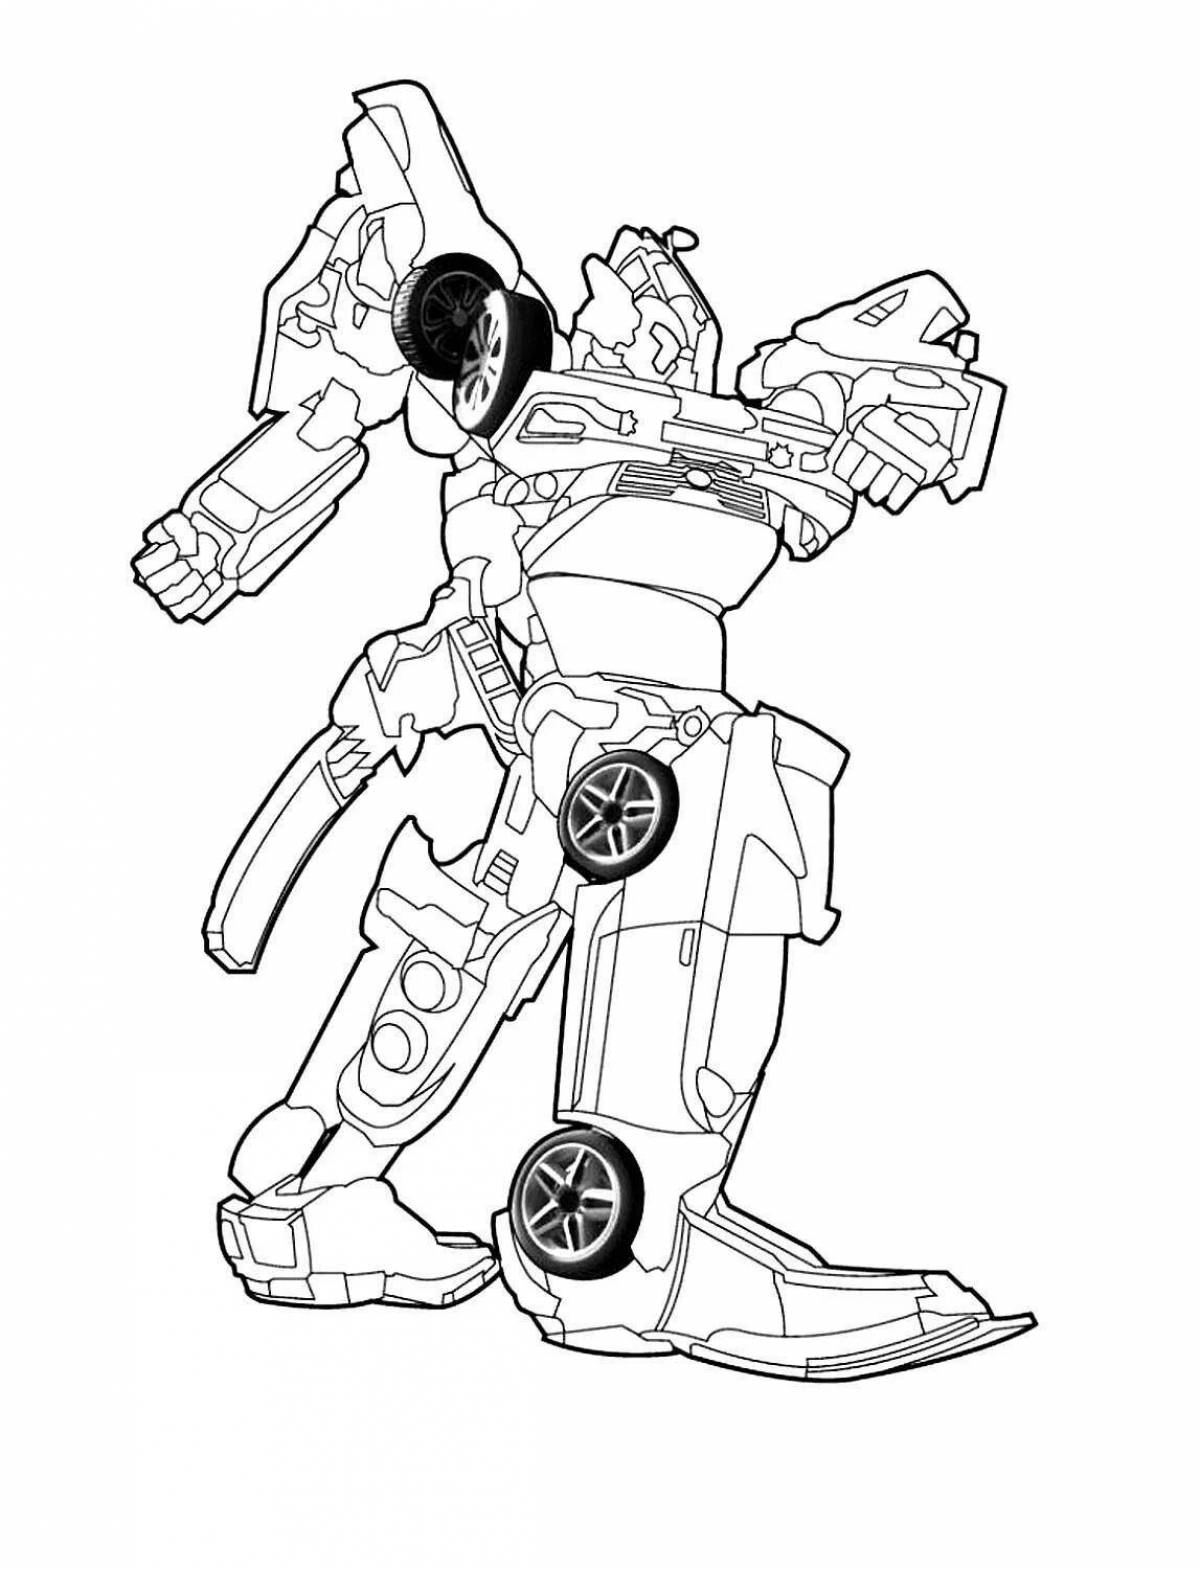 Magma 6 tobot playful coloring page